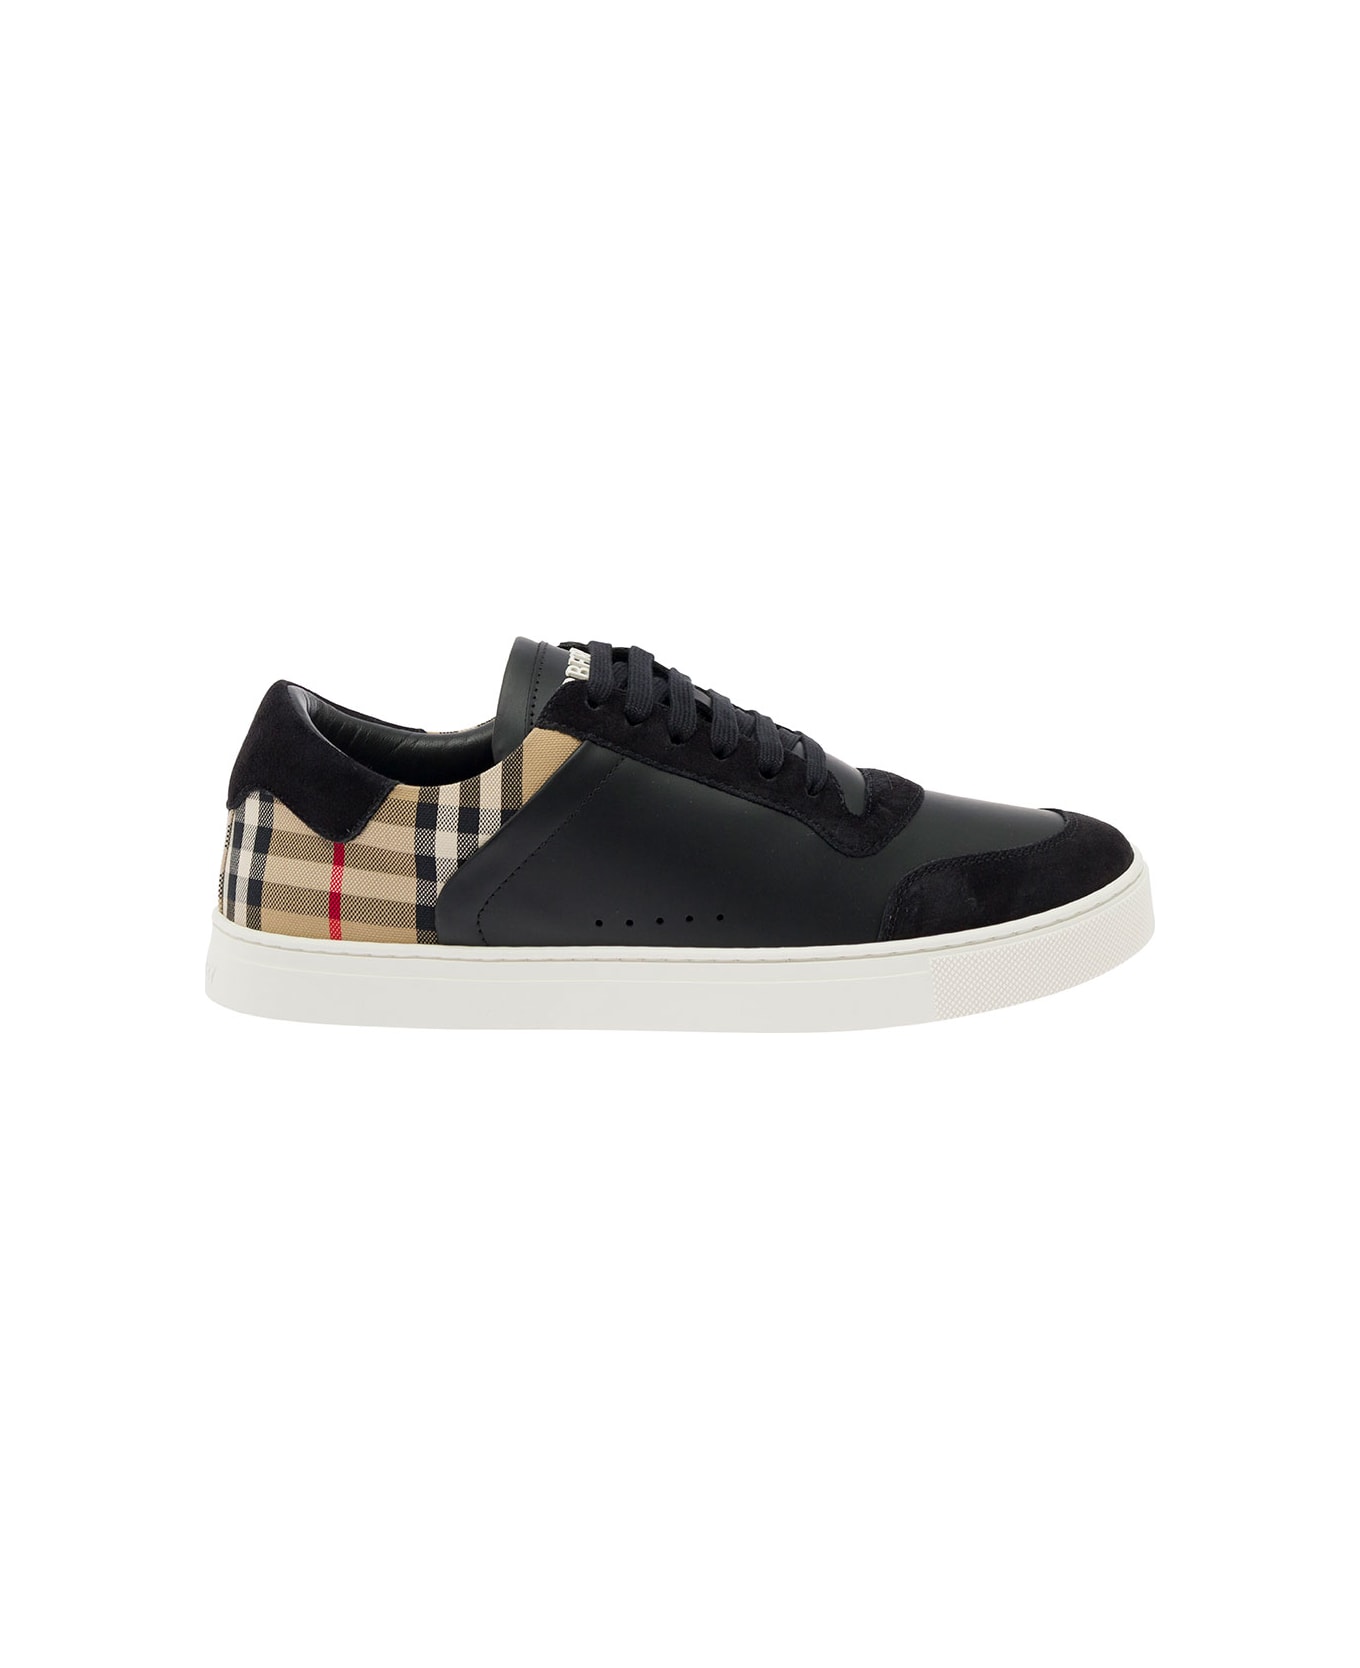 Burberry Black Sneakers With Suede Details And Check Motif In Leather Blend Man - Black